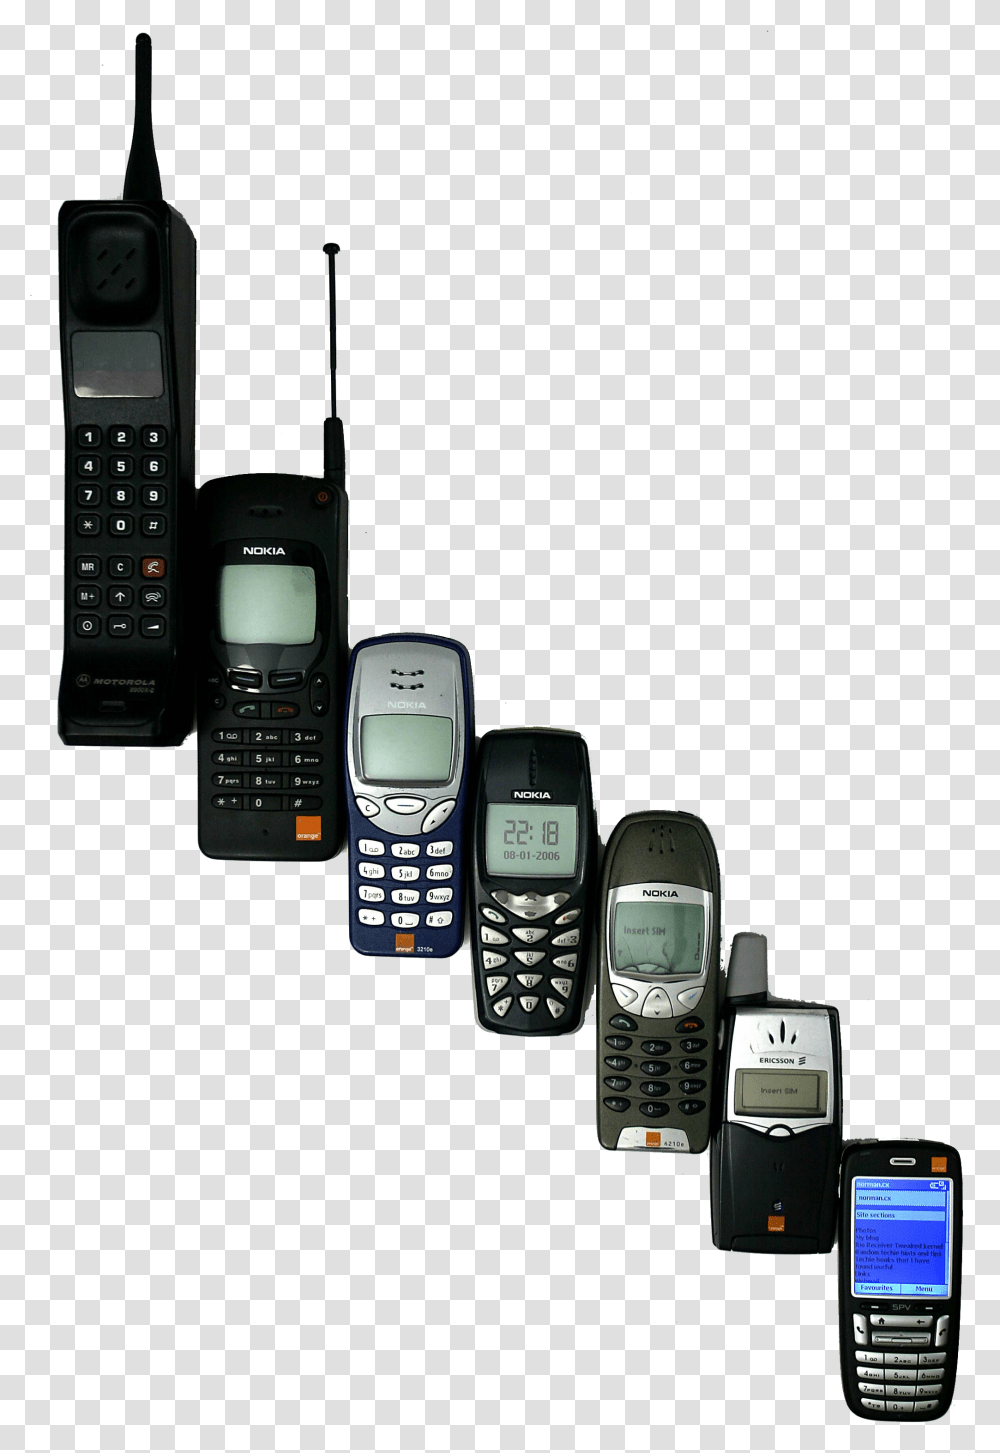 Mobilephoneevolutionpng 20483072 Mobile Phone History The First Telephone, Electronics, Cell Phone, Iphone Transparent Png